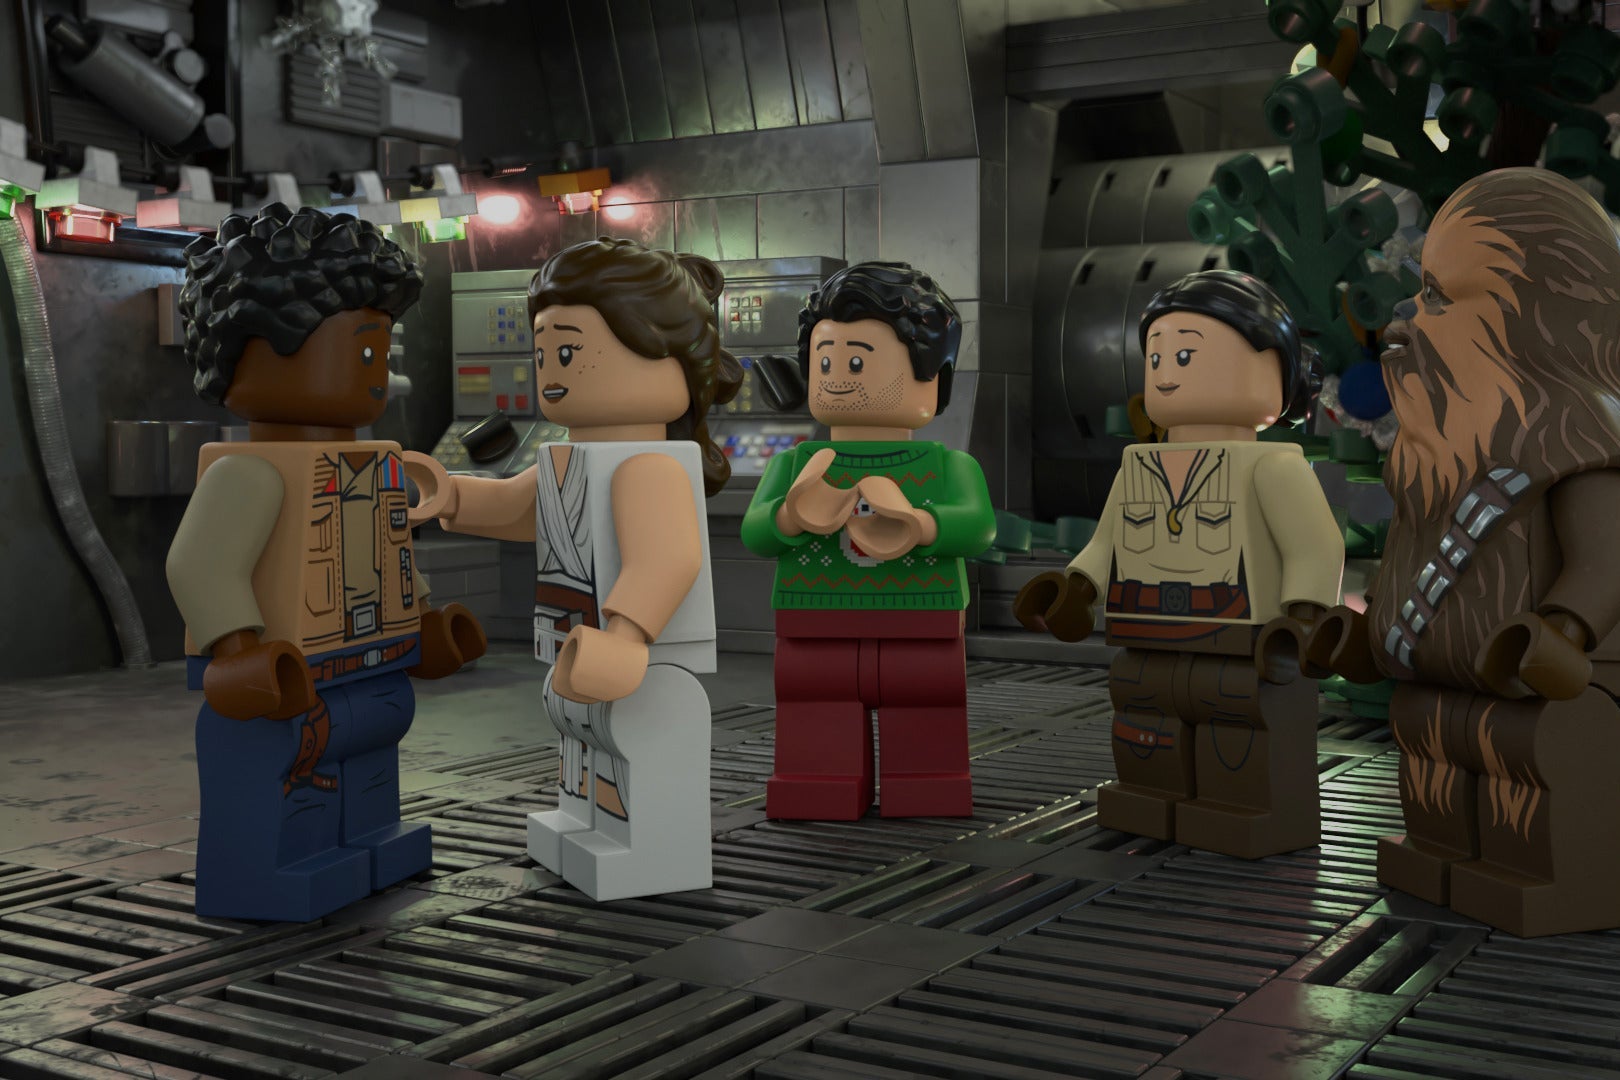 Finn, Rey, Poe, Rose, and Chewie, in Lego form.